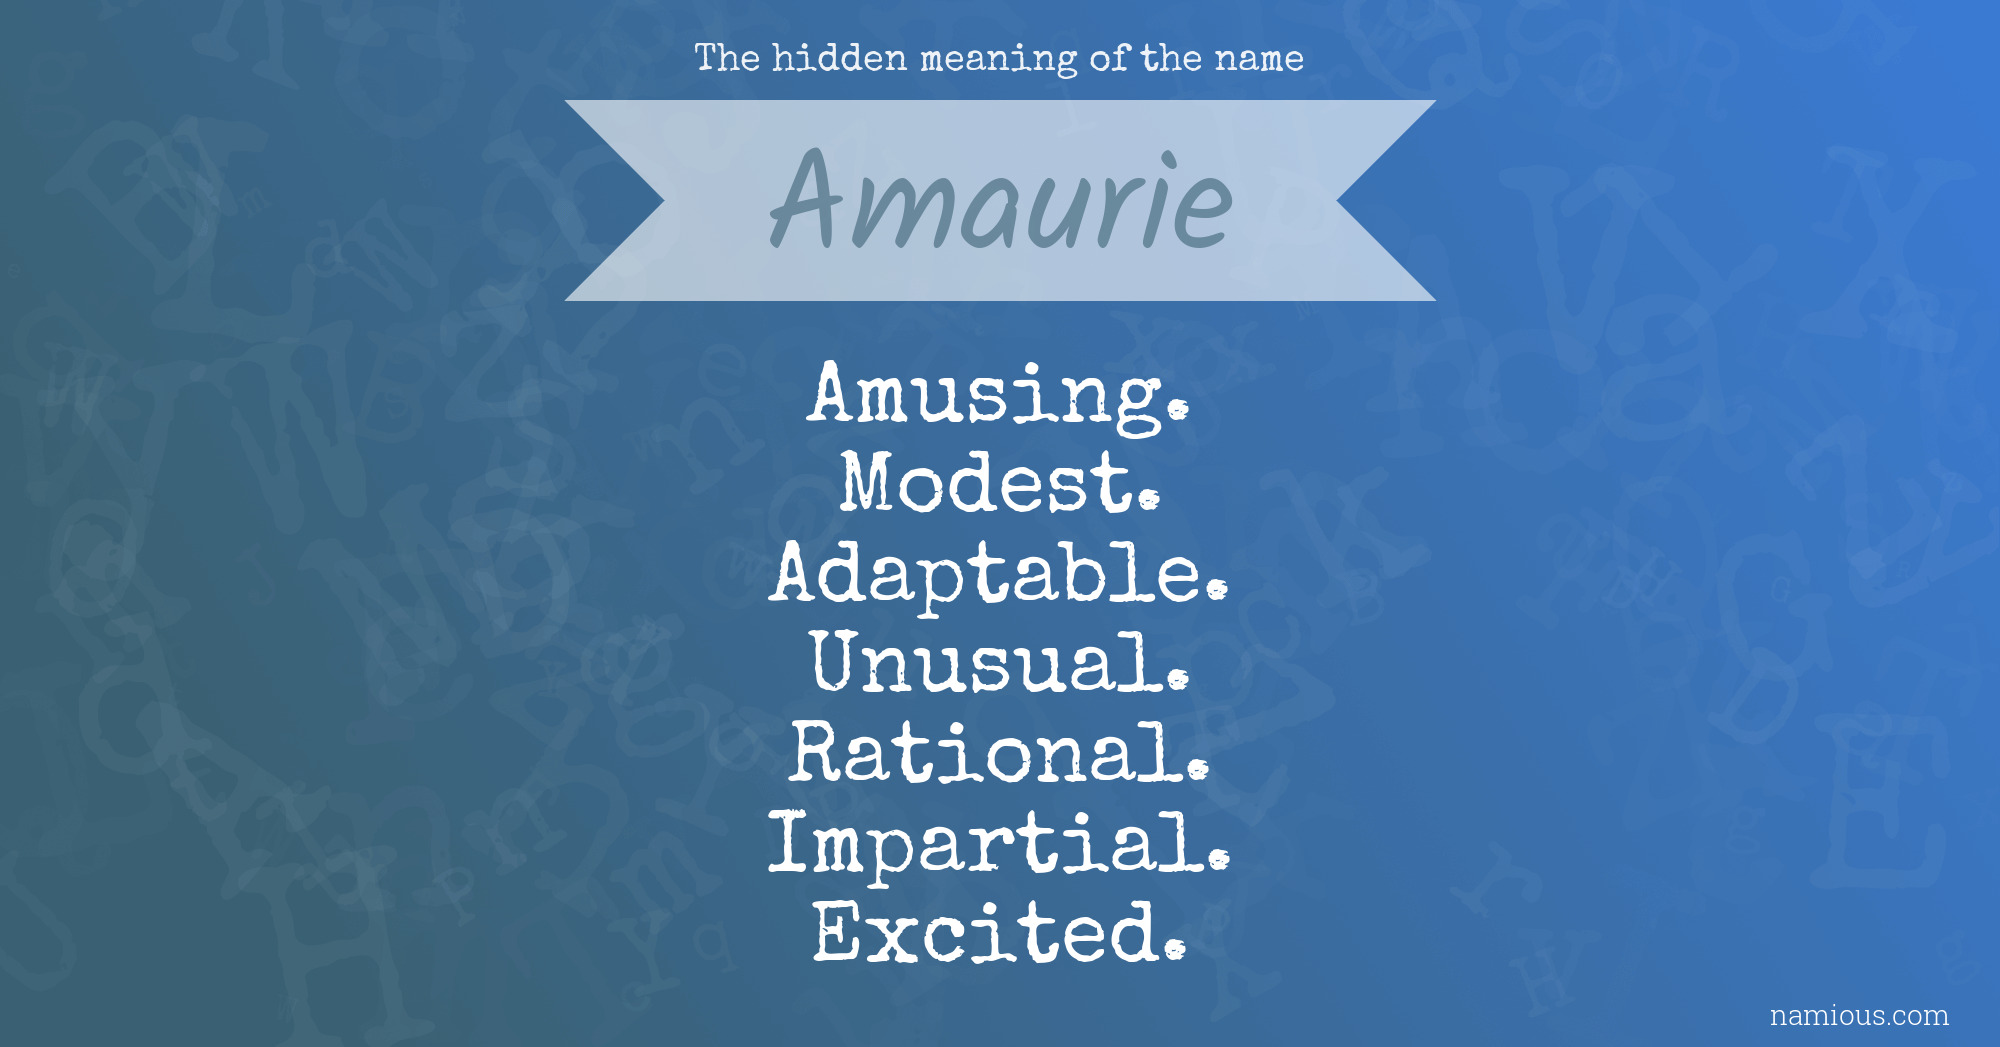 The hidden meaning of the name Amaurie